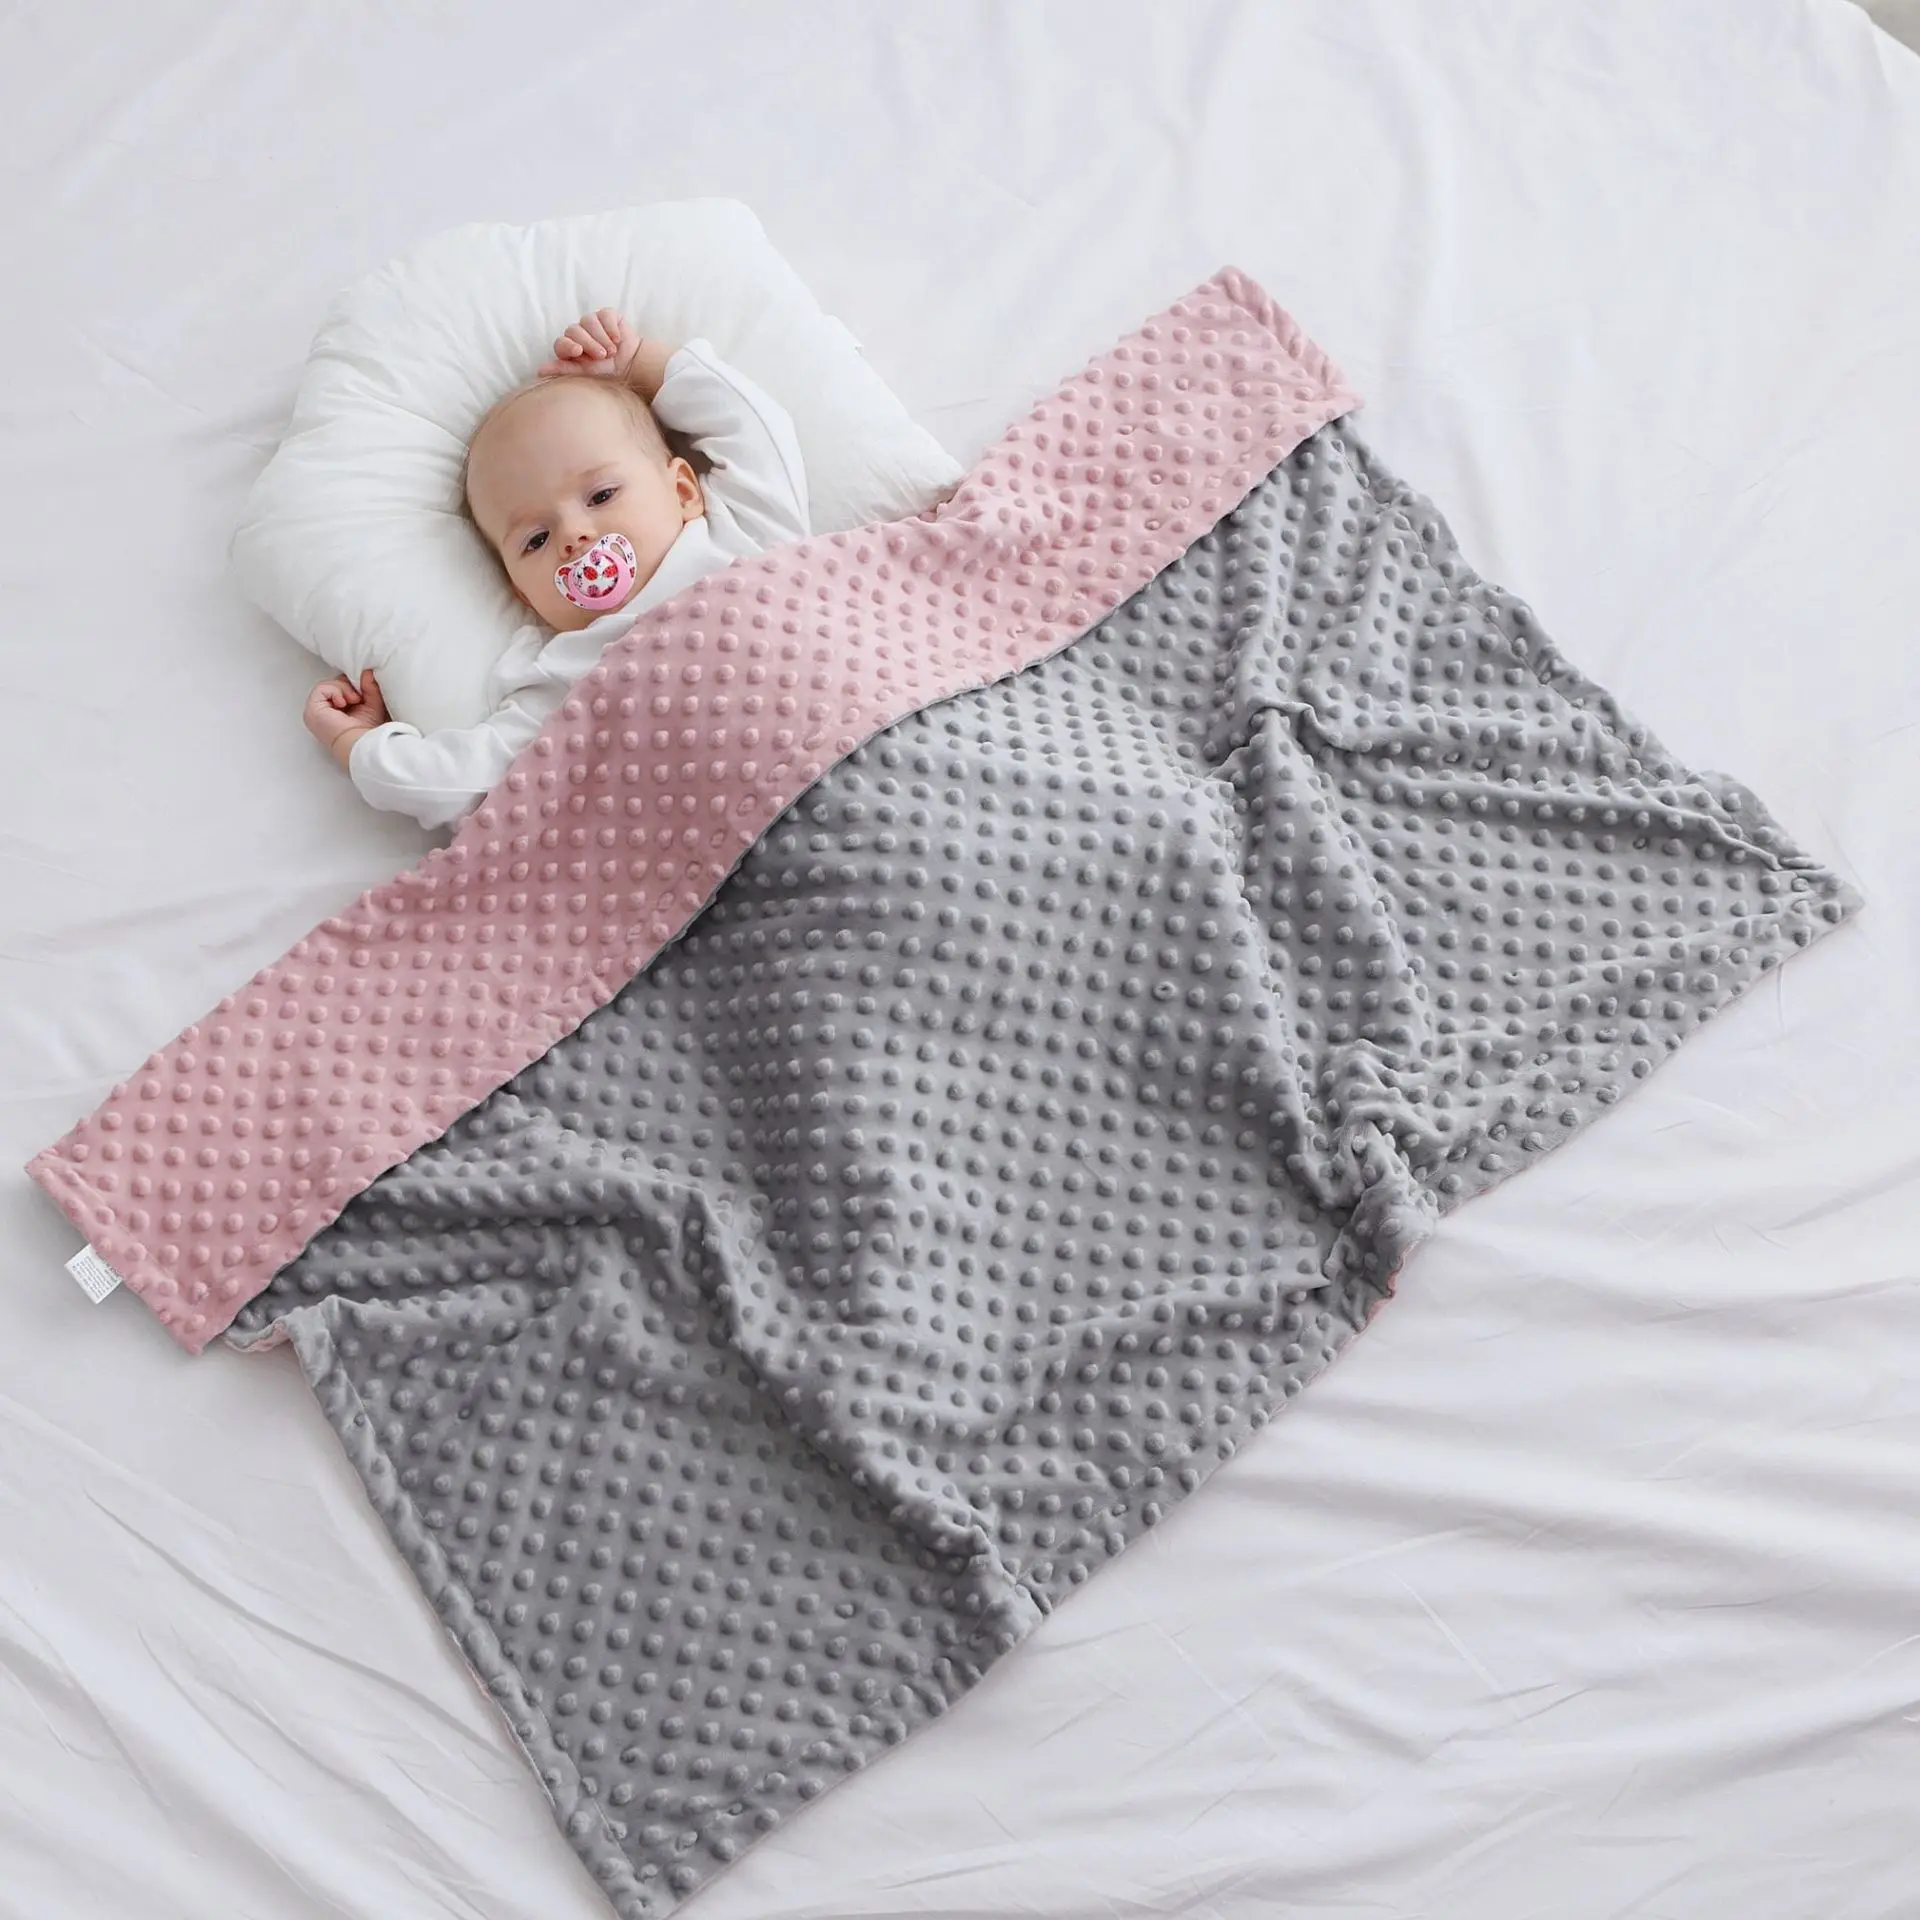 Baby Comforting Blanket Super Soft Plush Double Layer Dotted Backing Lovely Brown Unisex Design Receiving Swaddling Wrap